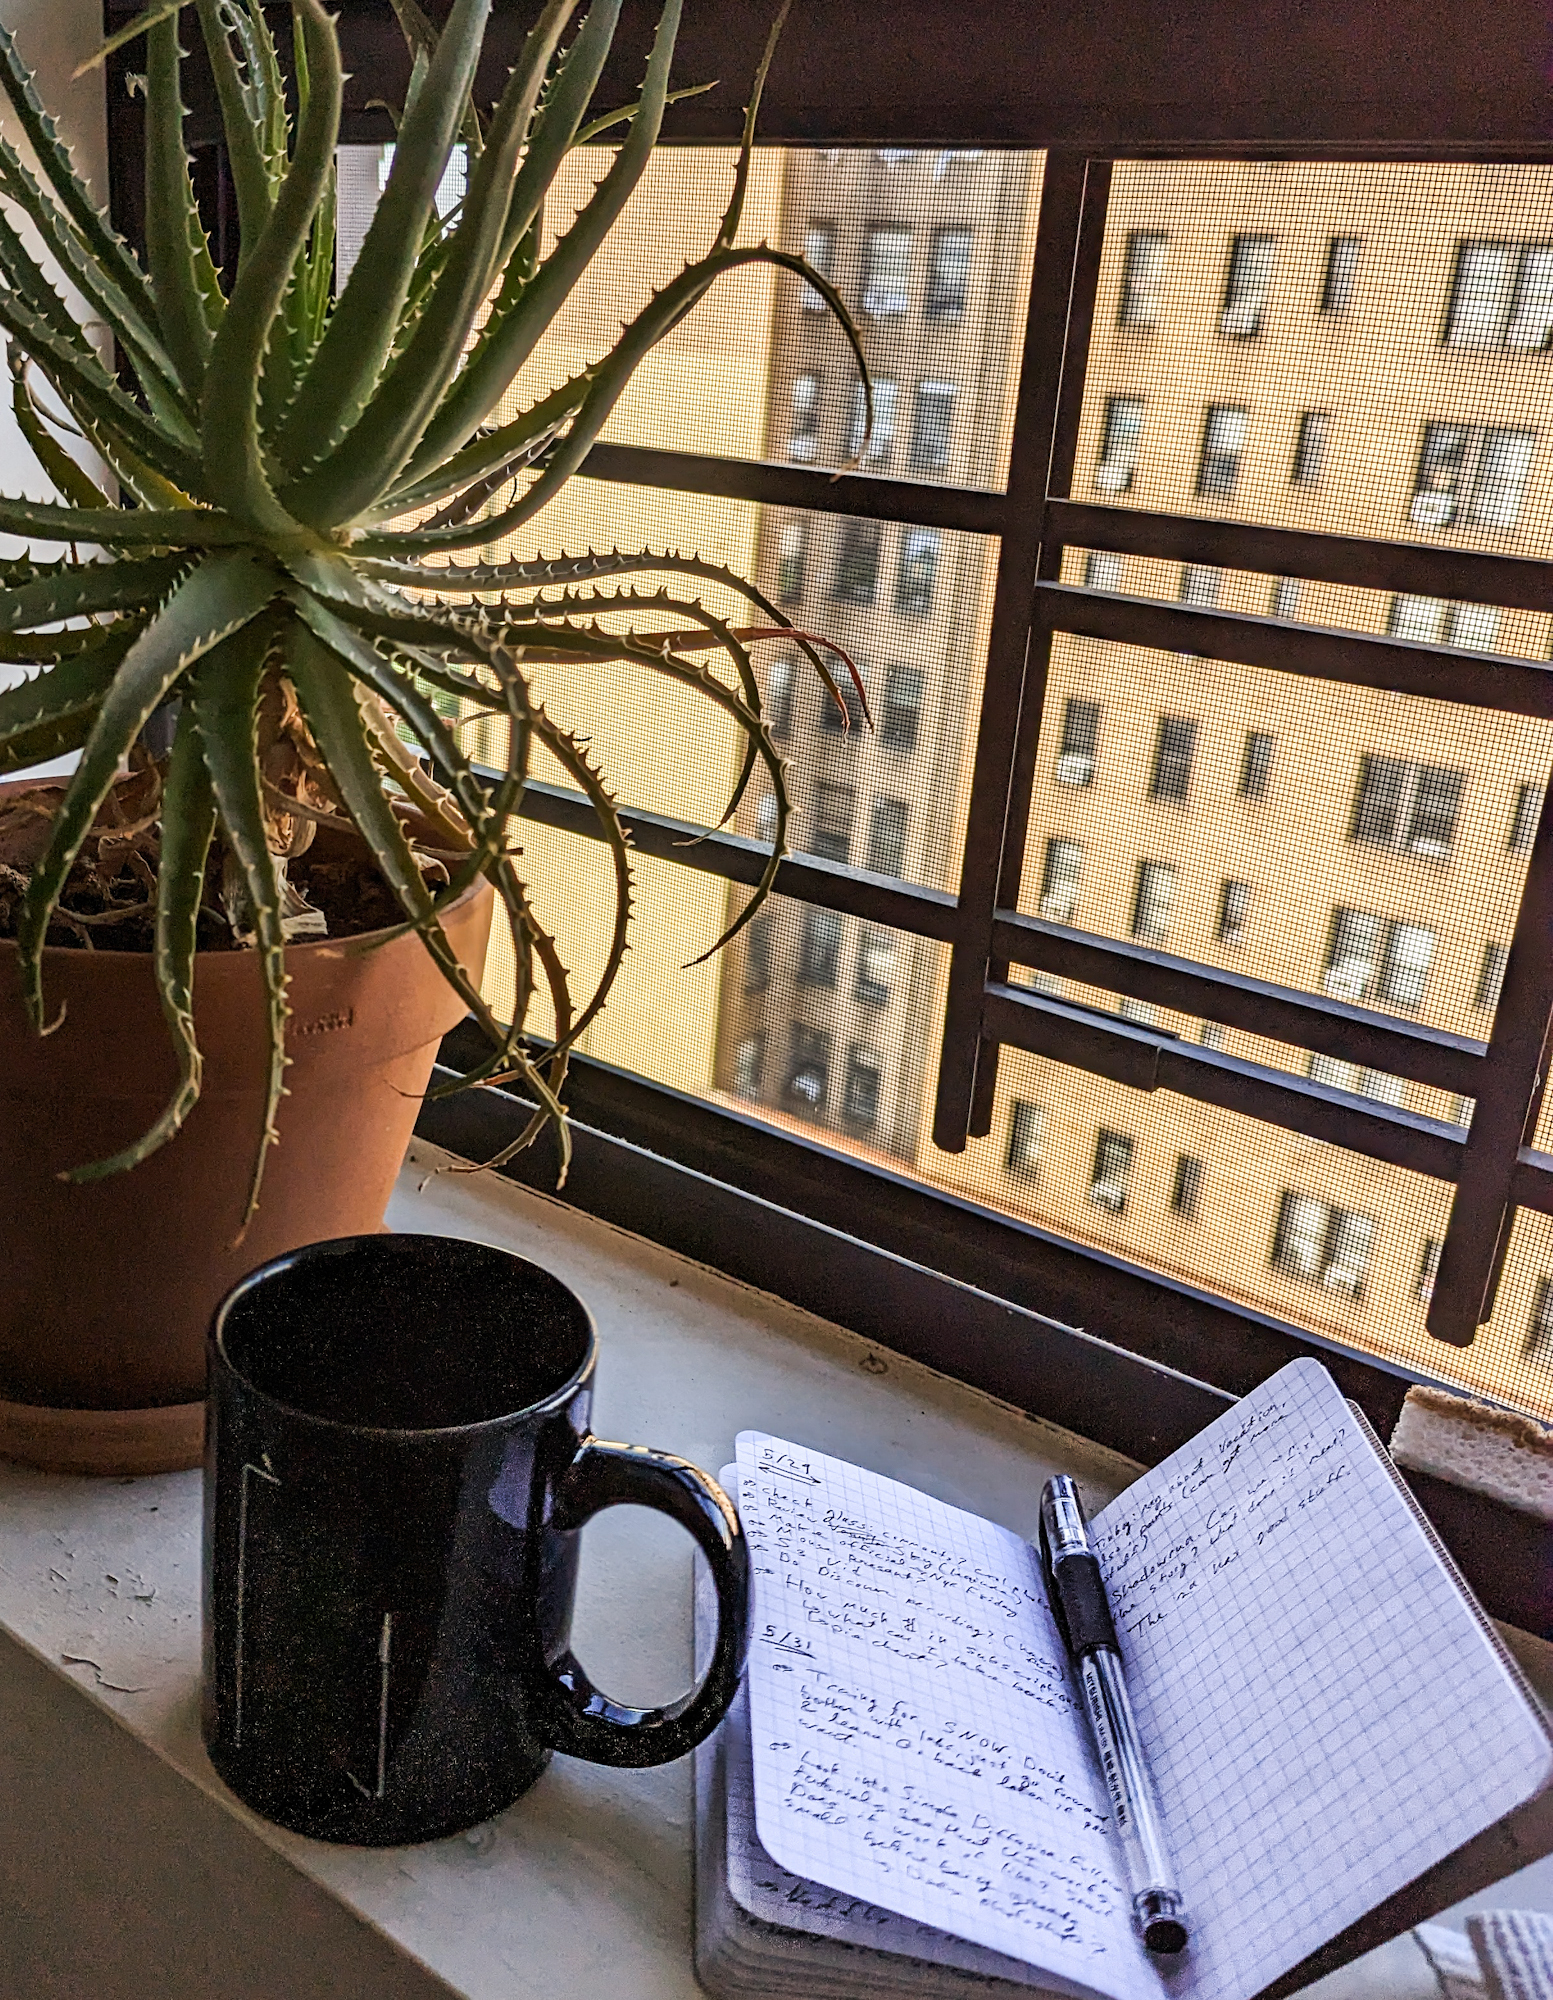 A view from an apartment a few floors up. There's another building nearby blocking most of the view. On the window seal: aloe vera, a mug of coffee and a pocket size notebook with scribbles in it.